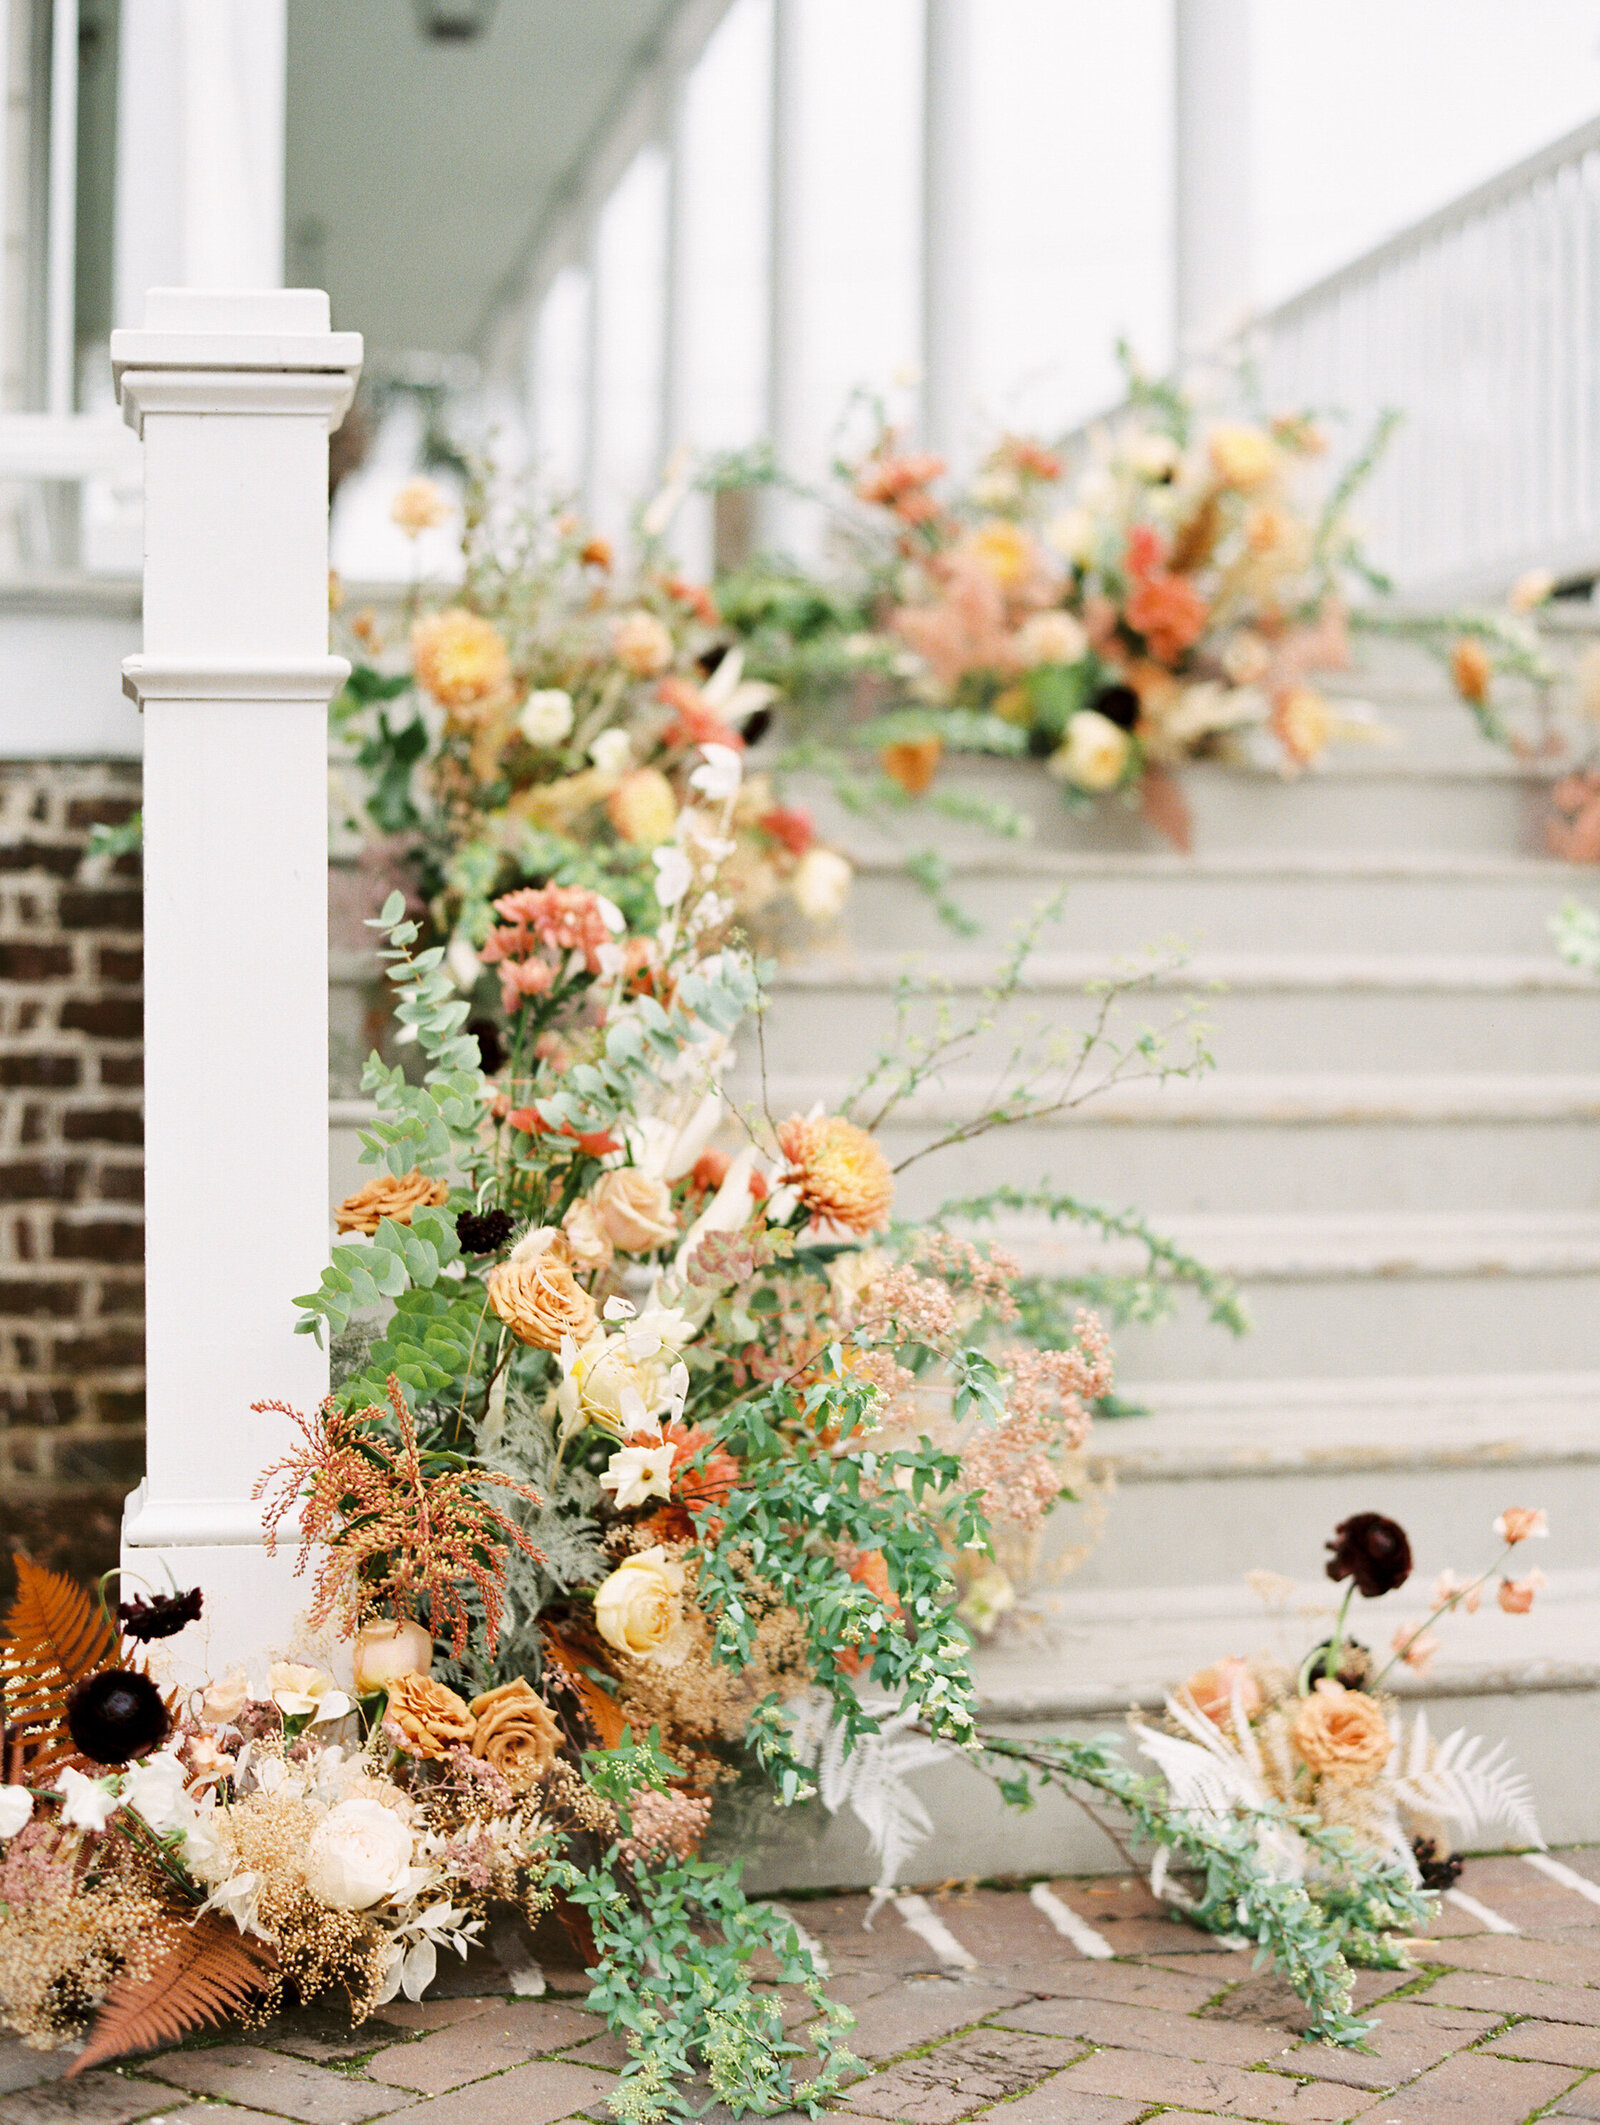 floral arrangement outside on the steps at the gadsden house in charleston south carolina